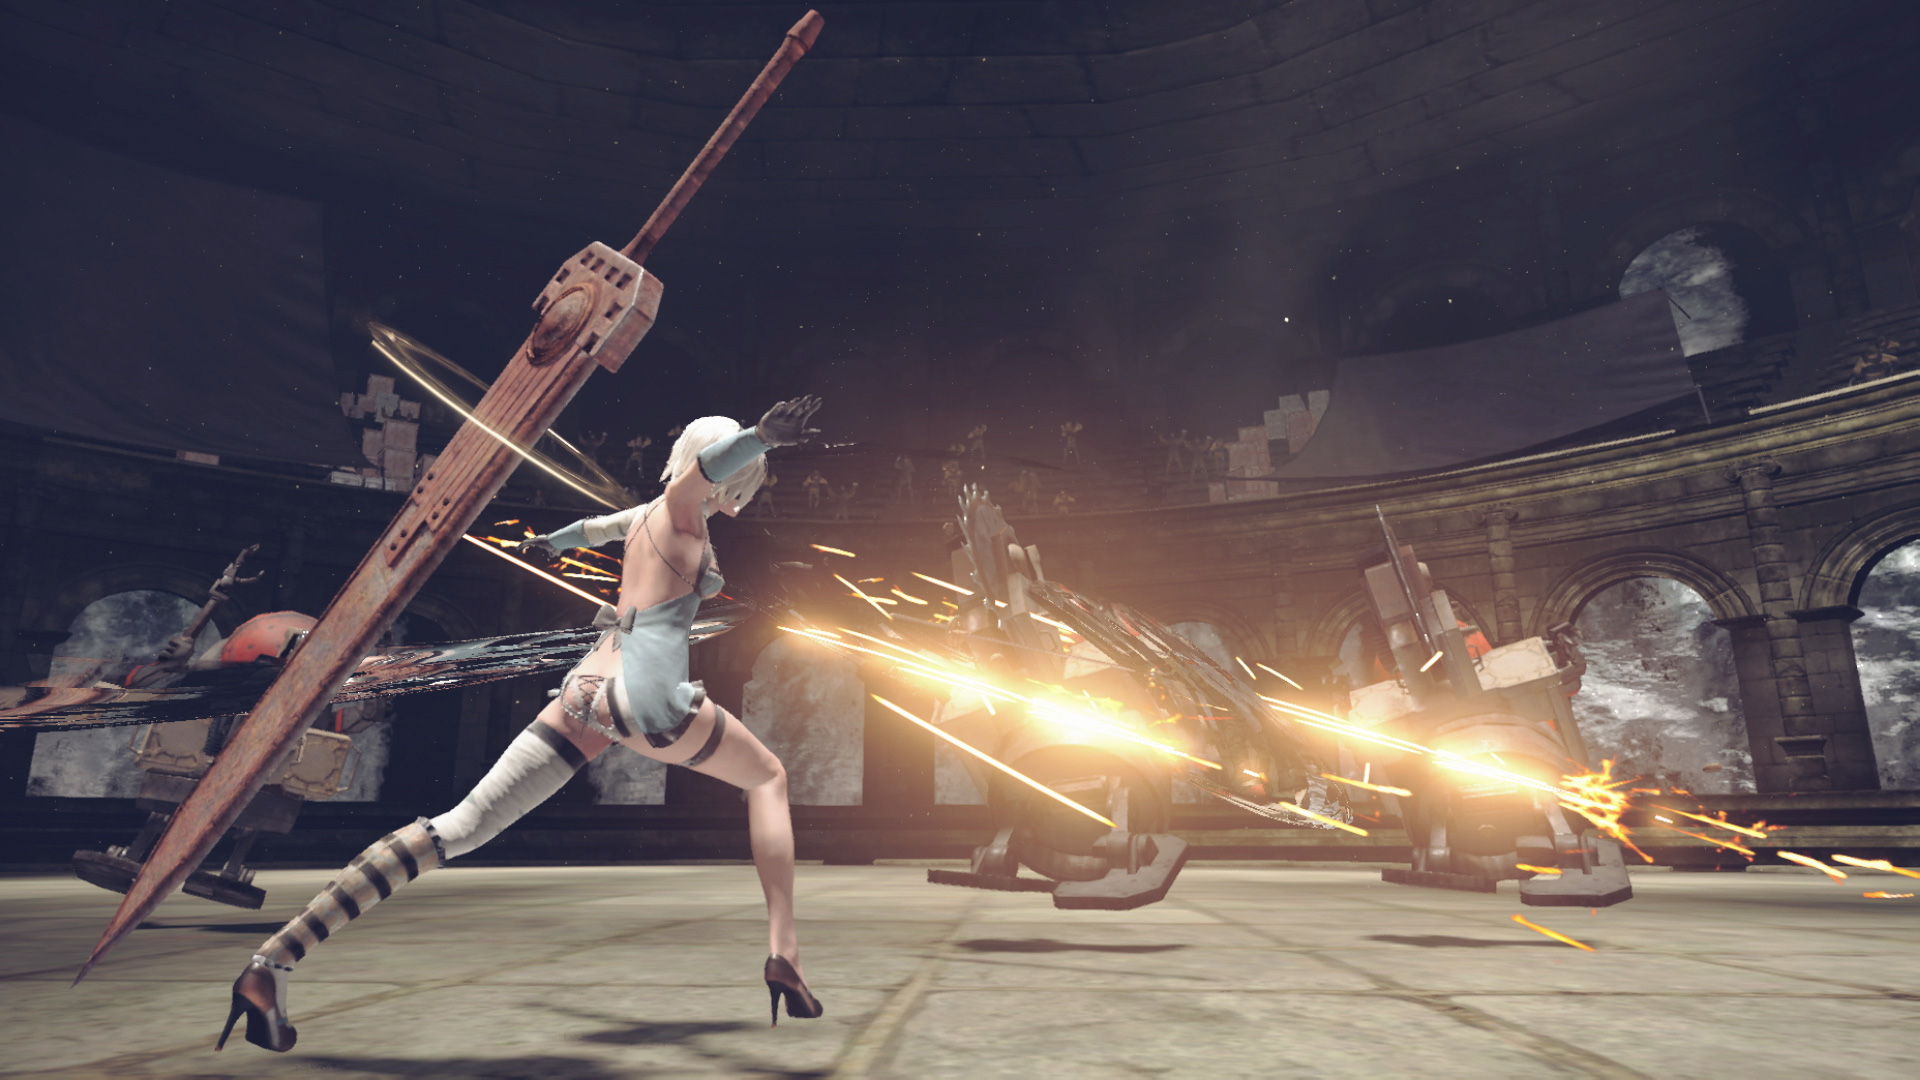 Nier: Automata Confirmed To Run At 30fps And 1080p Docked On Switch